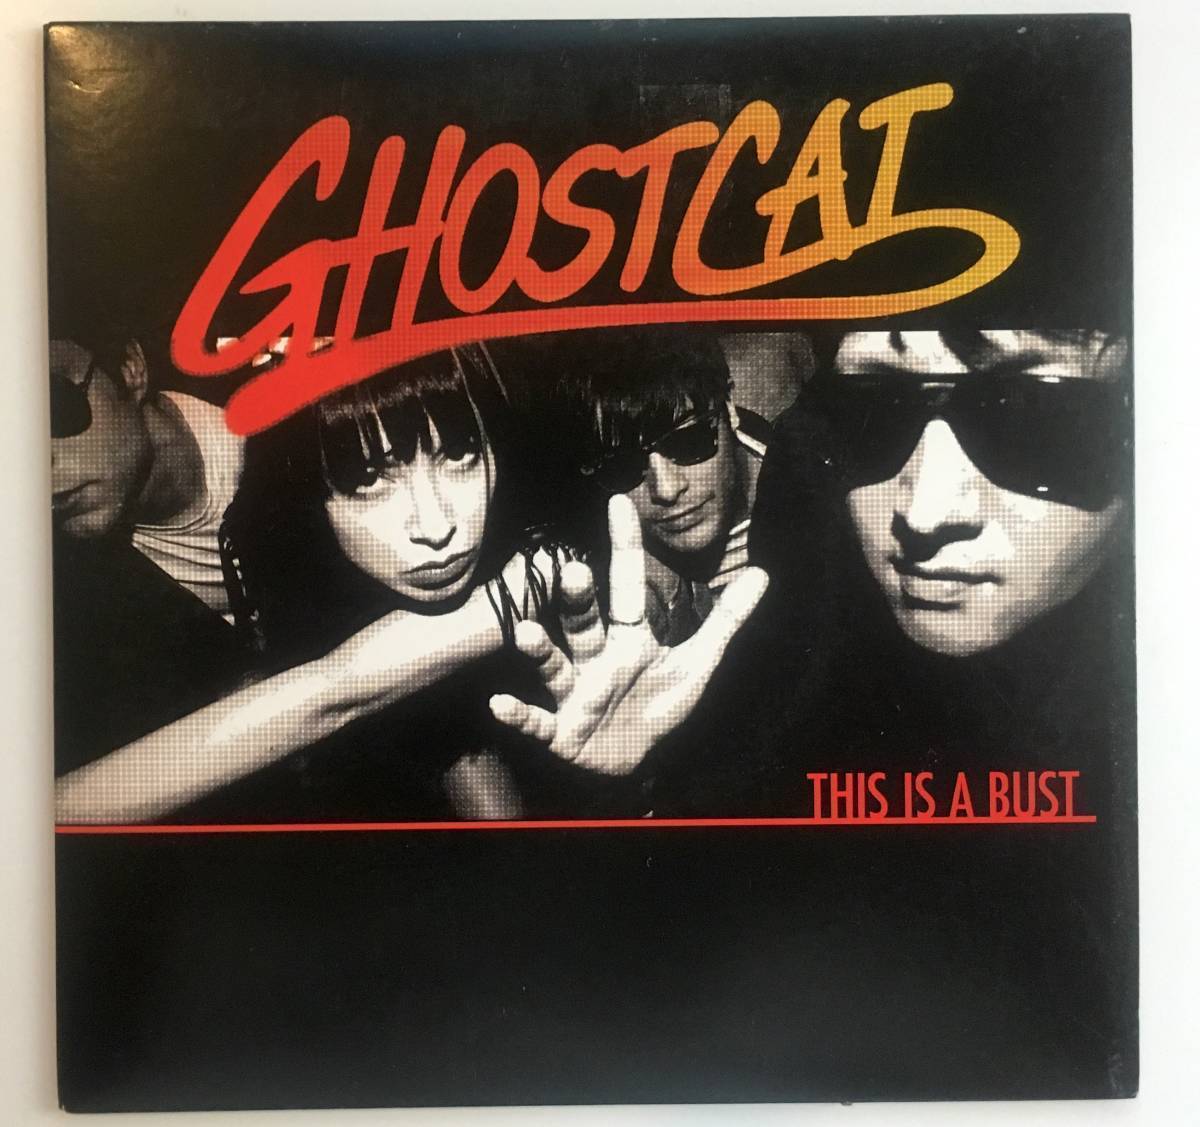 GHOSTCAT「This Is A Bust」7インチレコード エレクトロパンク_画像1